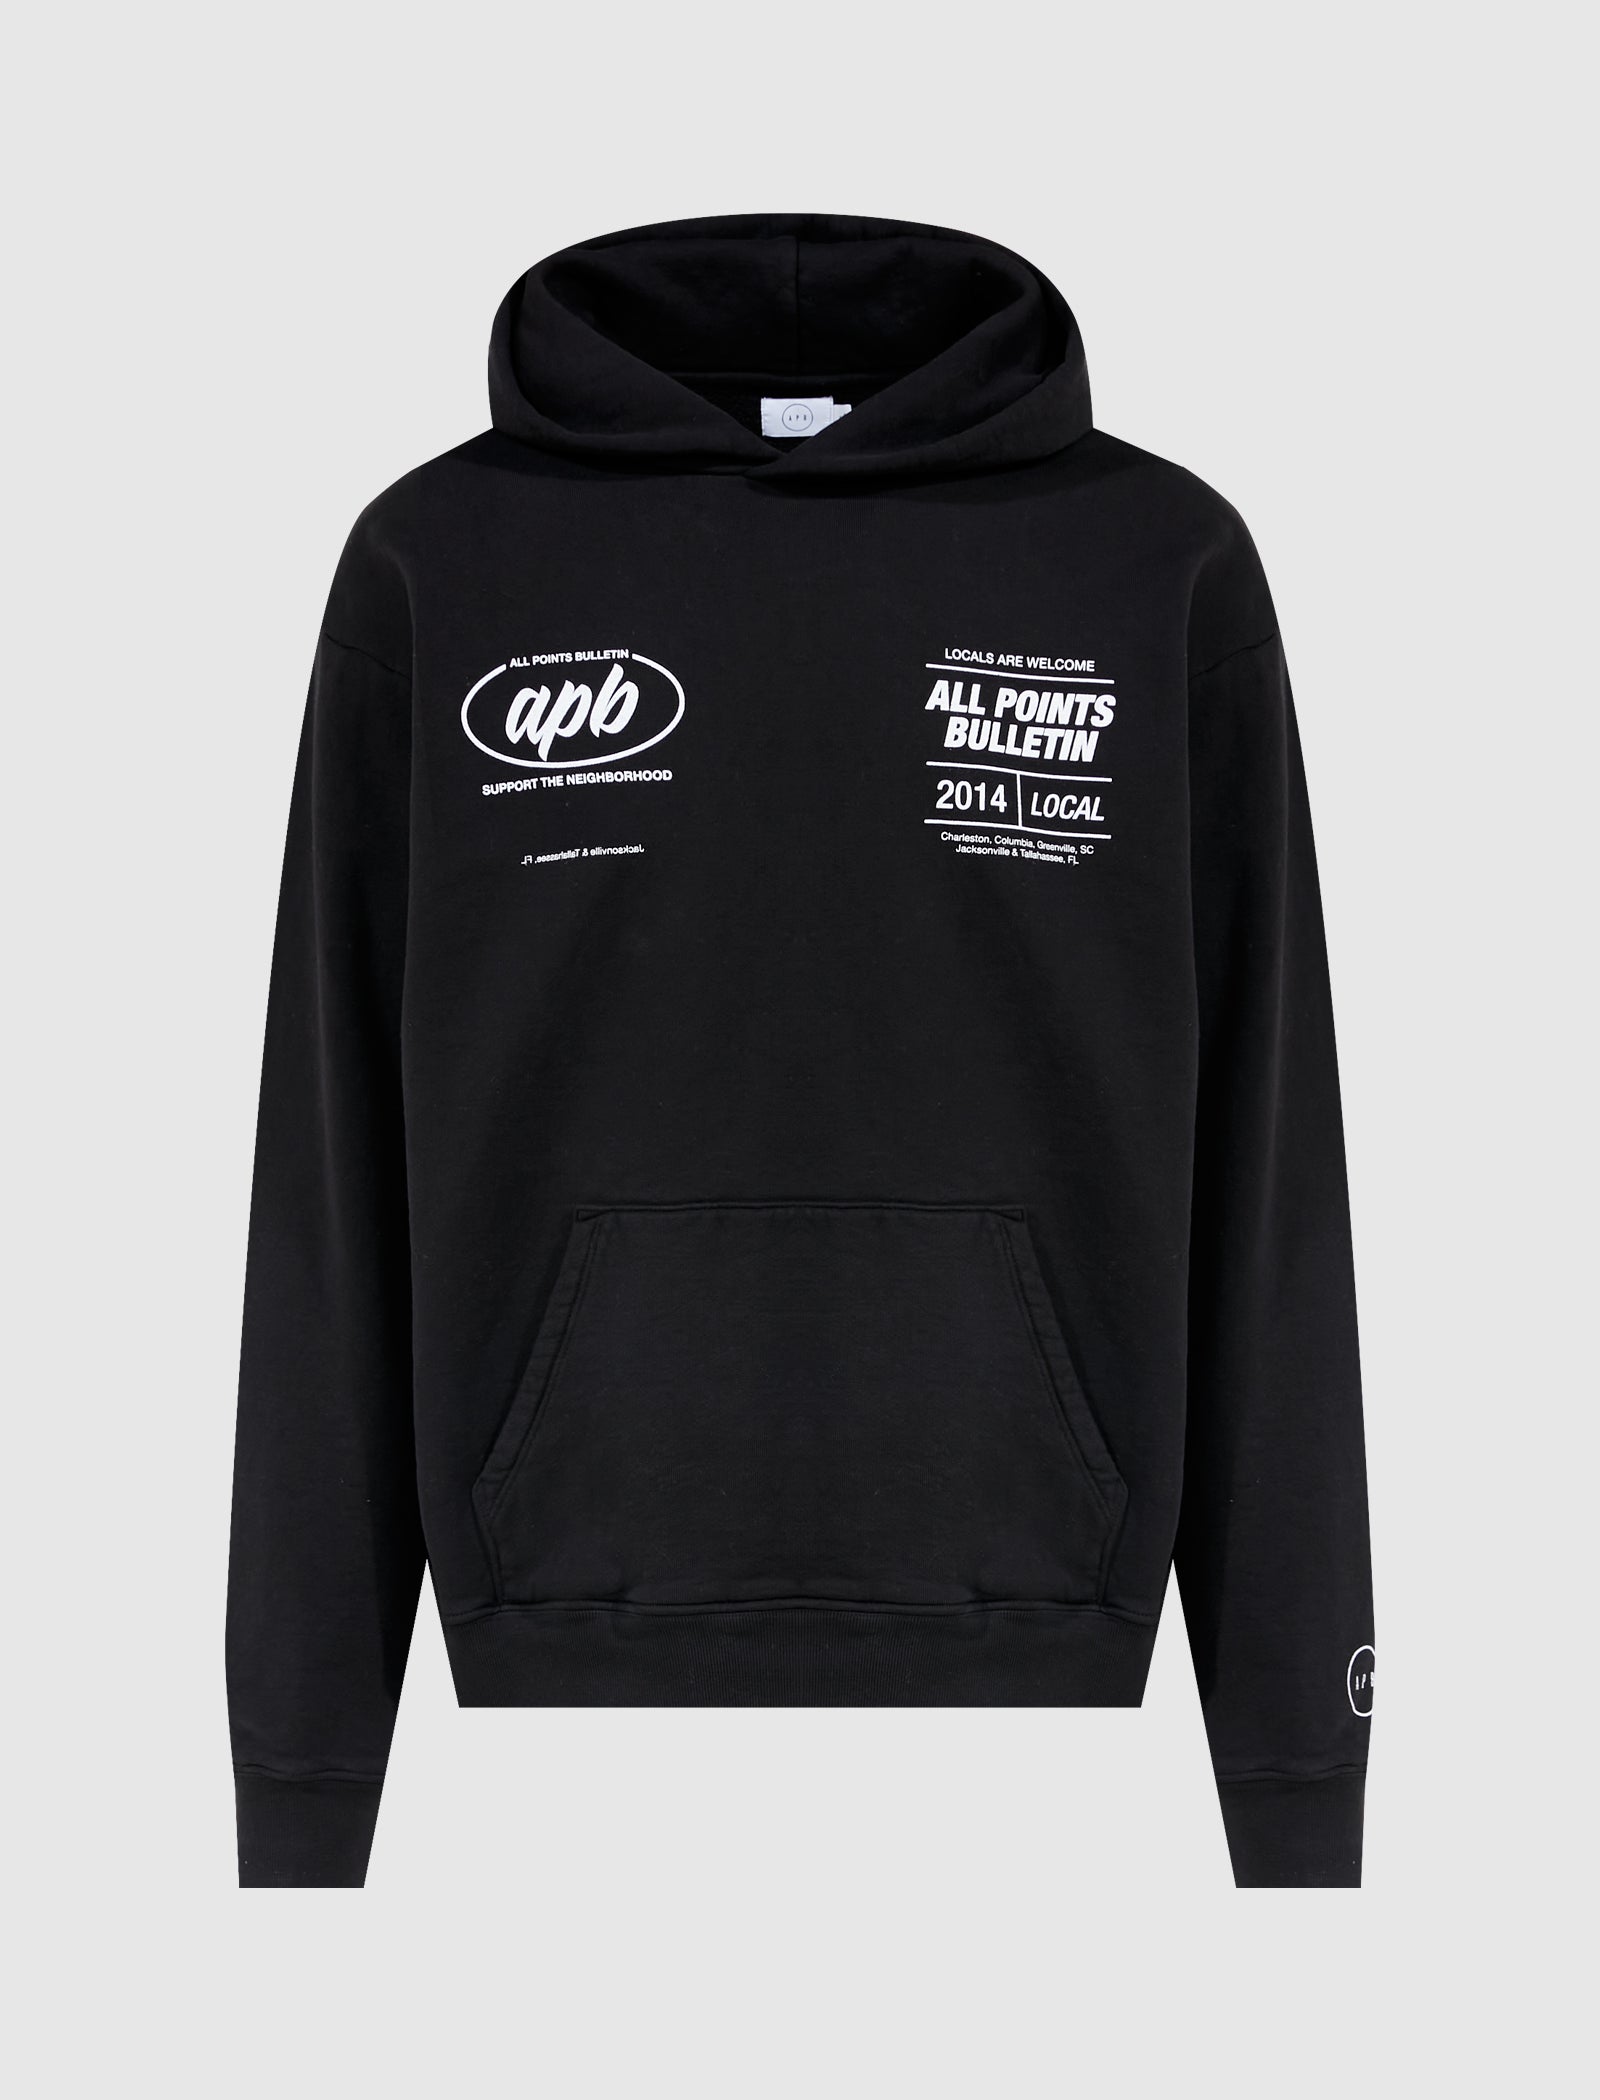 SUPPORT THE HOODIE APB Store